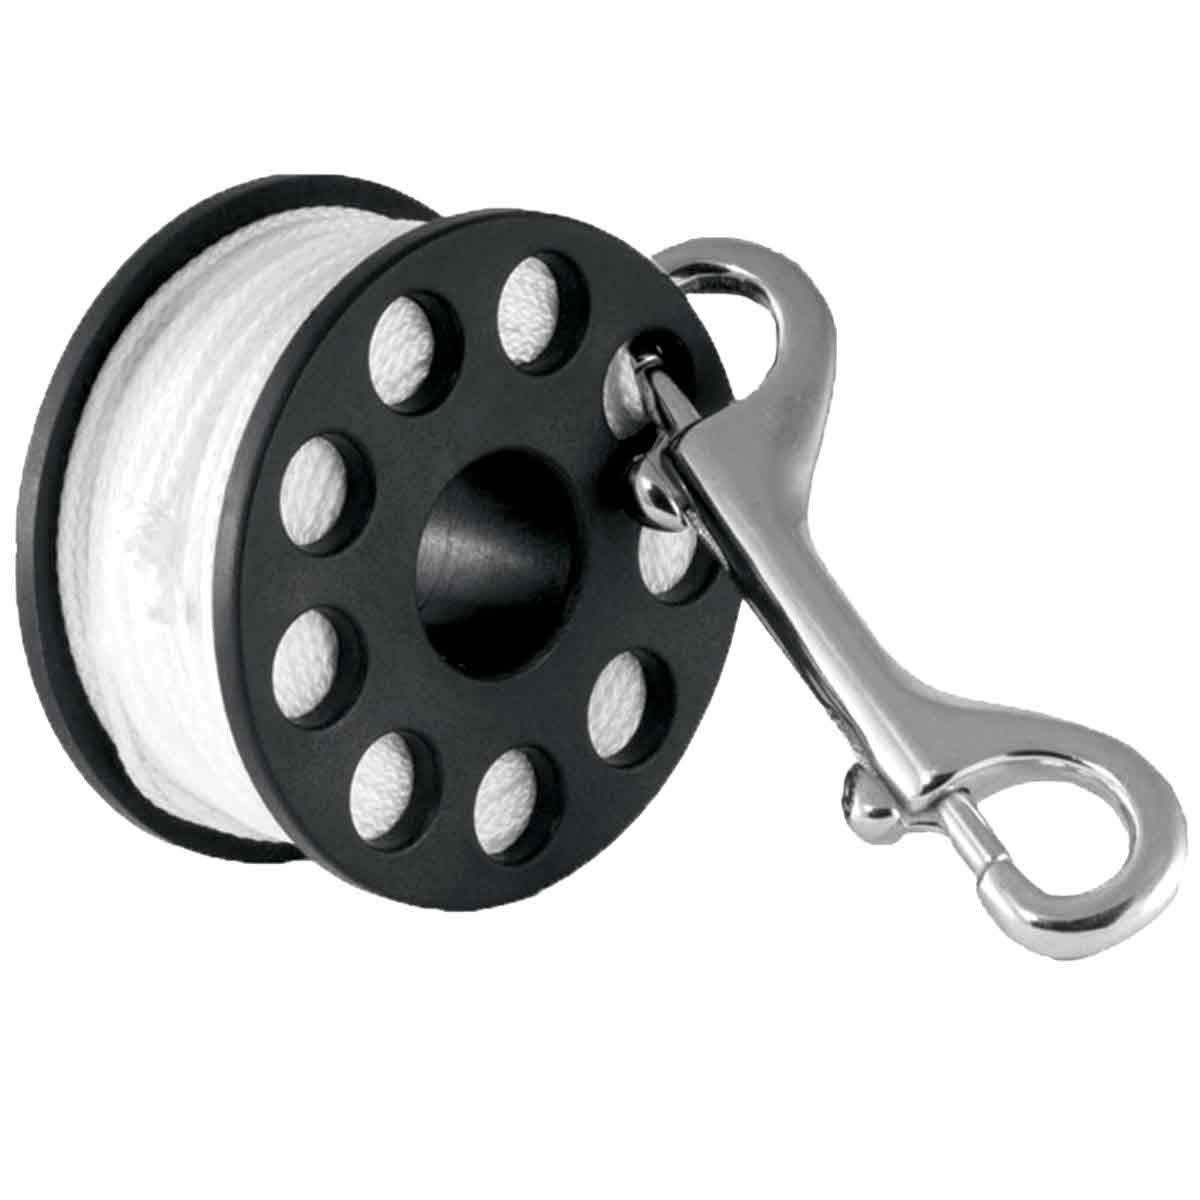 Hollis New Path Seeker Cave & Wreck Scuba Diving Finger Spool Reel (150')  with Double Ended Stainless Steel Boltsnap